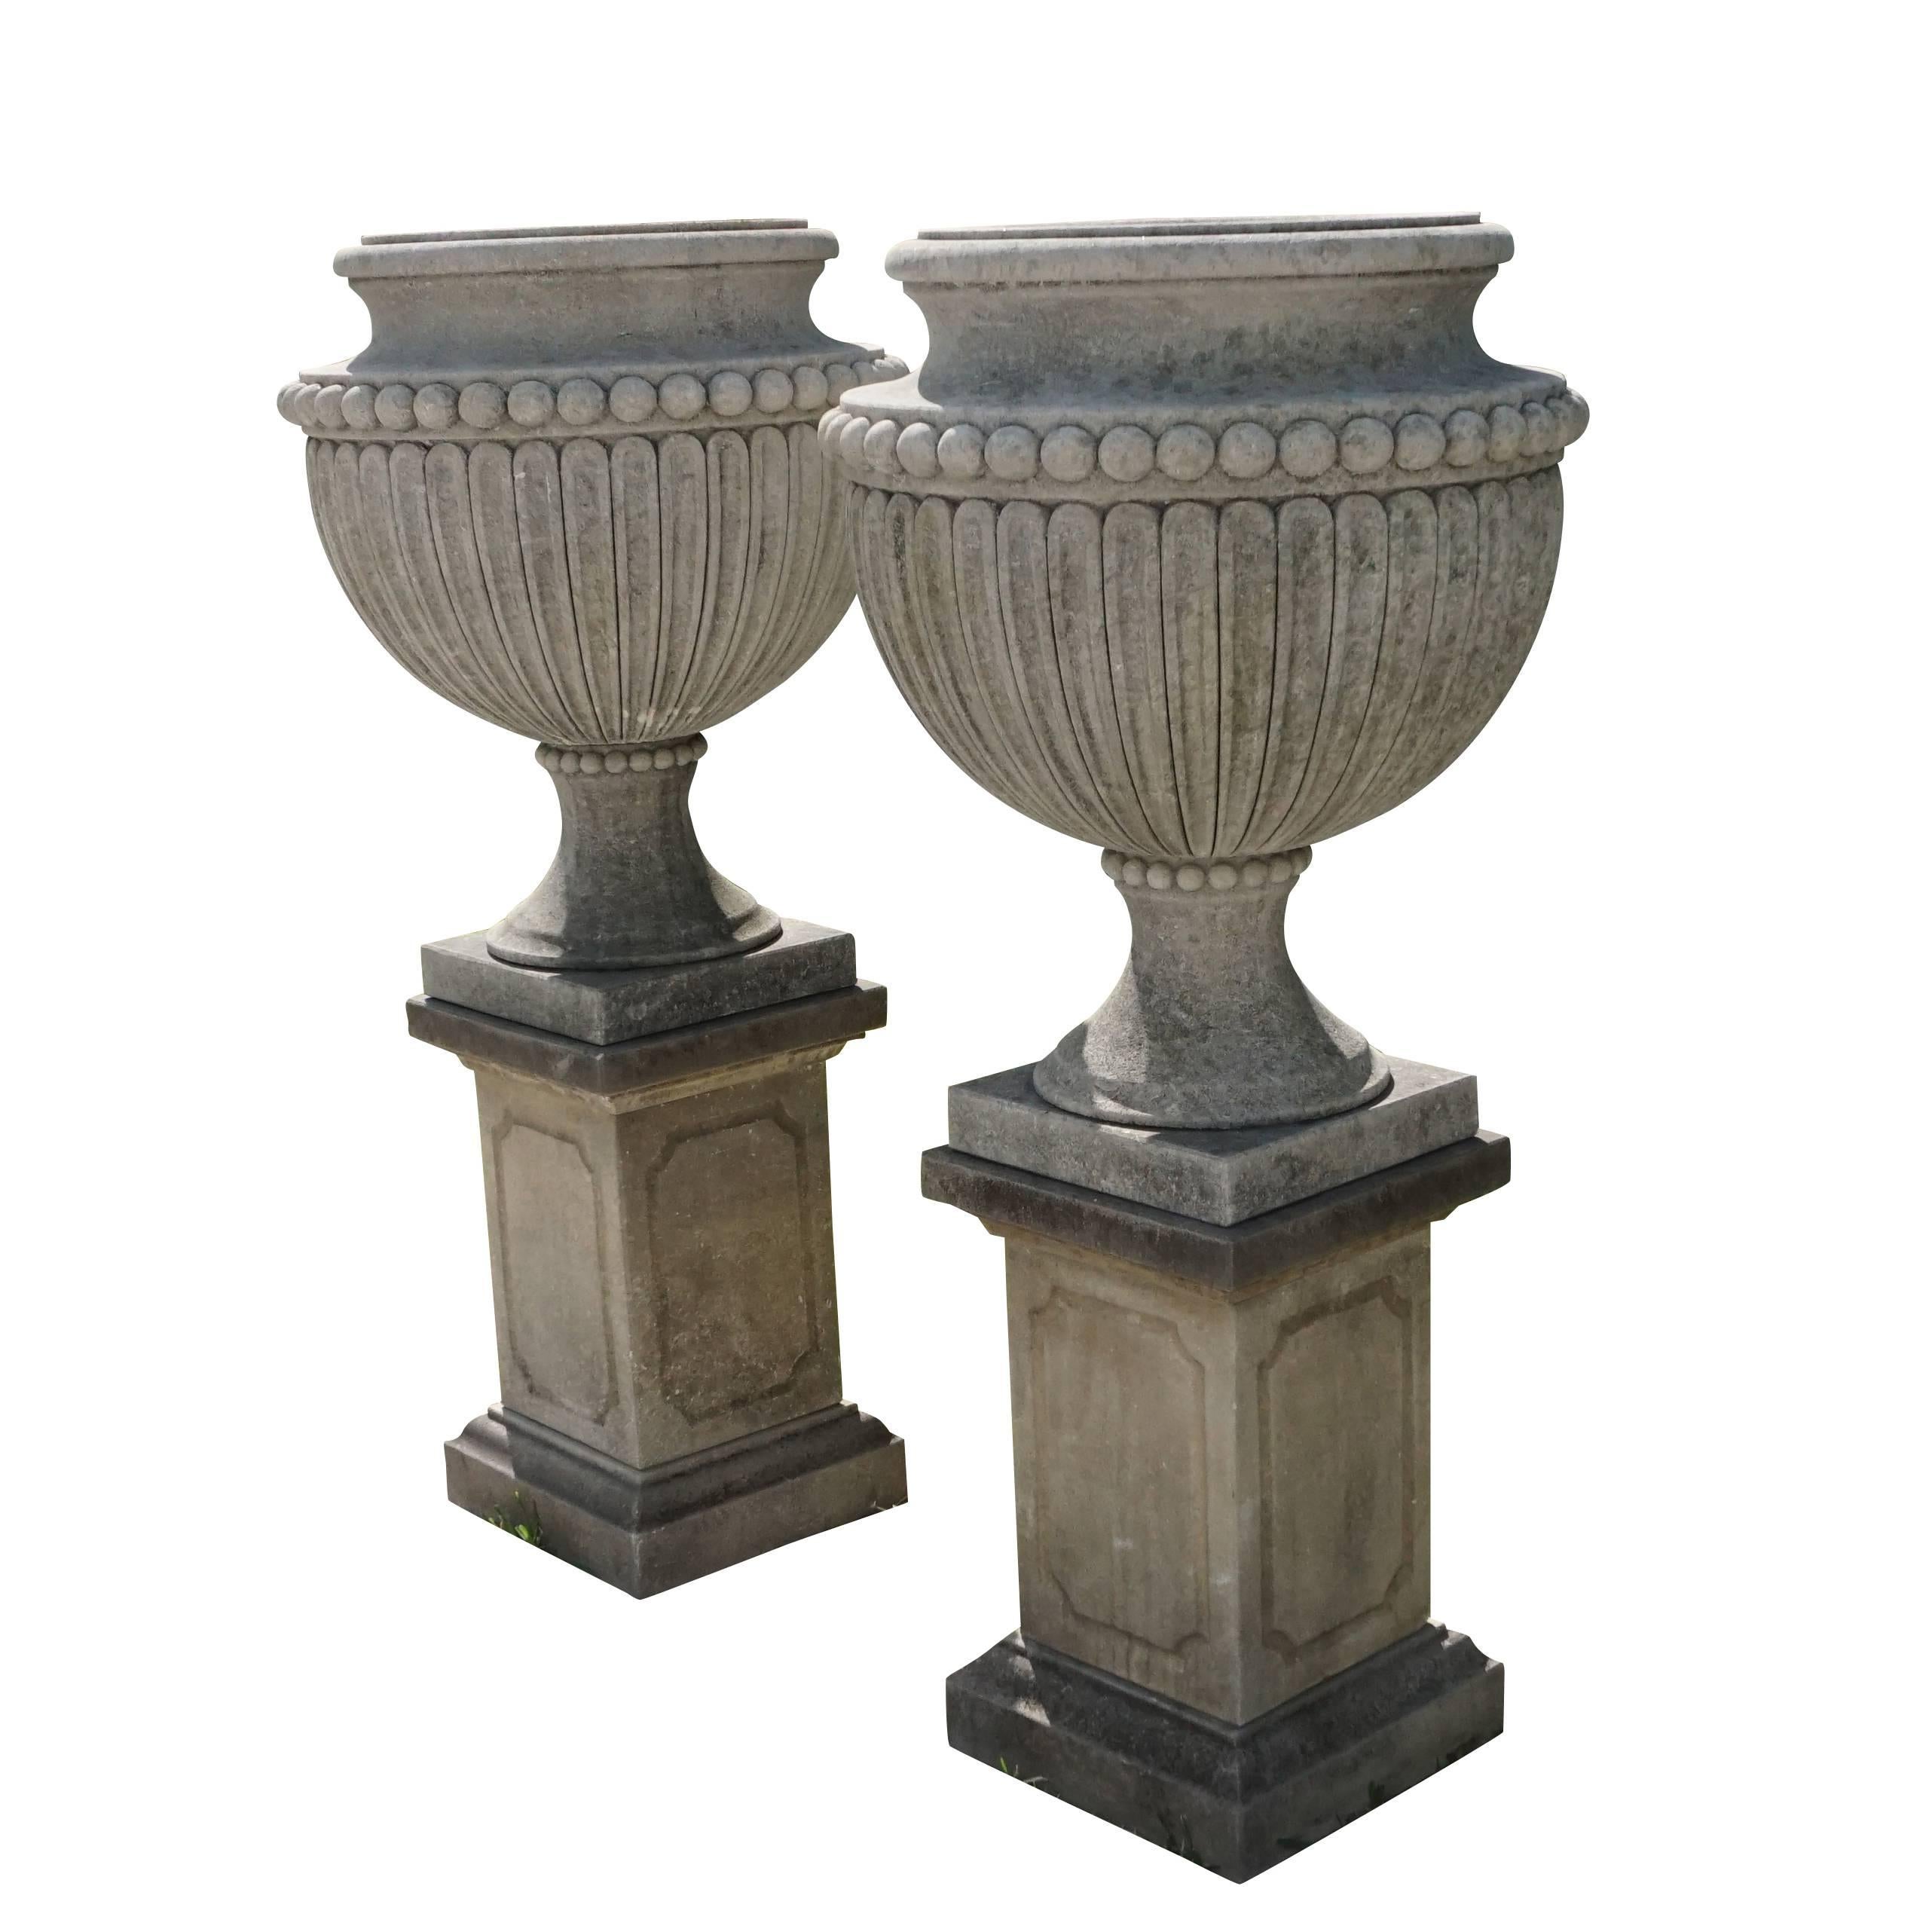 A pair of limestone urns “ Vases aux Gouttes “on original square pedestals with a fine bevel. The garden urns have a lobed ovoid body and are positioned on a circular foot with a square base. Wear consistent with age and use.

Urn: 32.5″ H

Base of